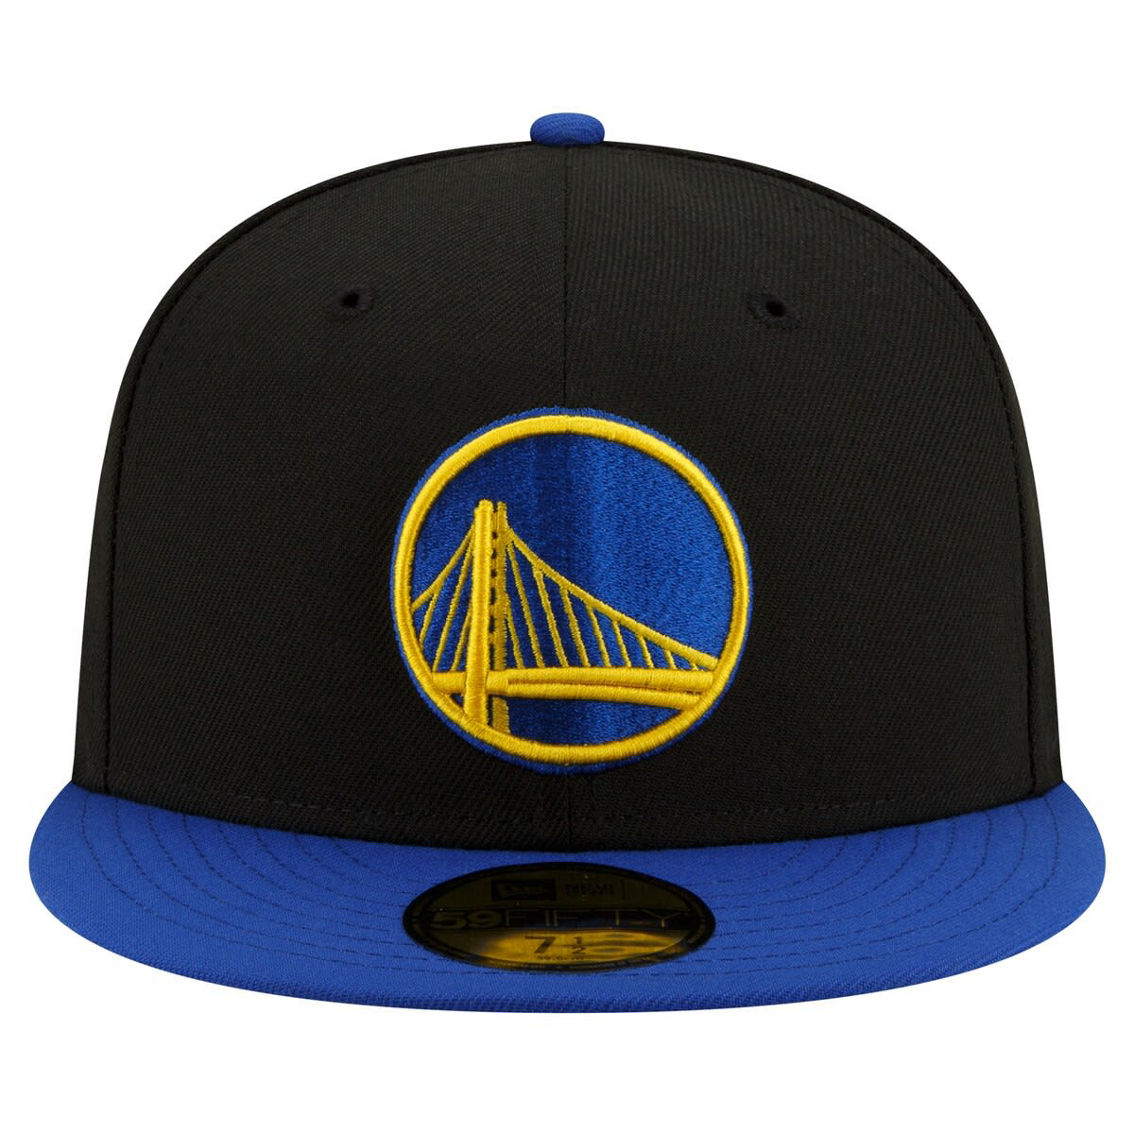 New Era Men's Black/Royal Golden State Warriors 2-Tone 59FIFTY Fitted Hat - Image 3 of 4